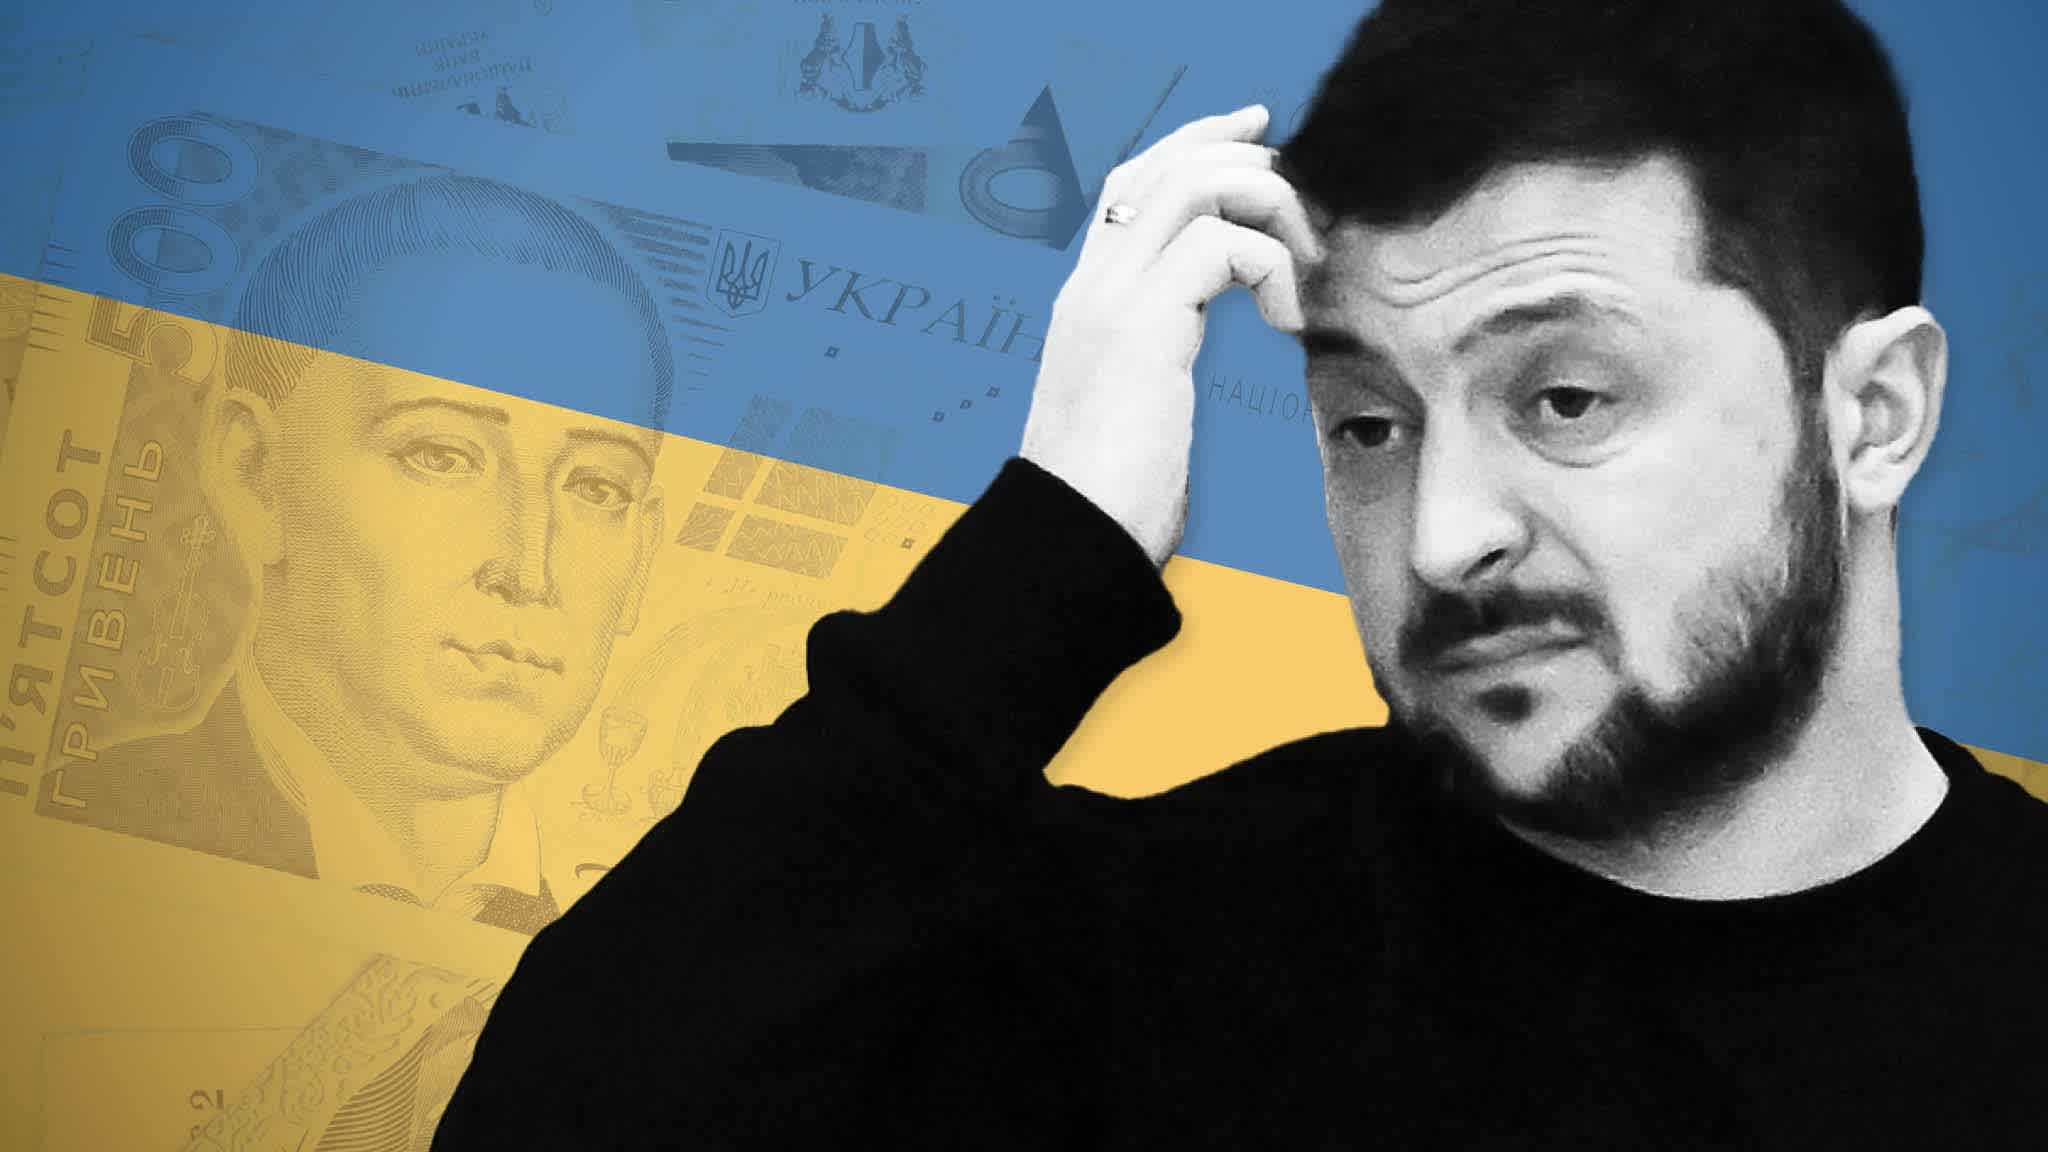 Anatomy of a scandal: why Zelenskyy launched a corruption crackdown in Ukraine